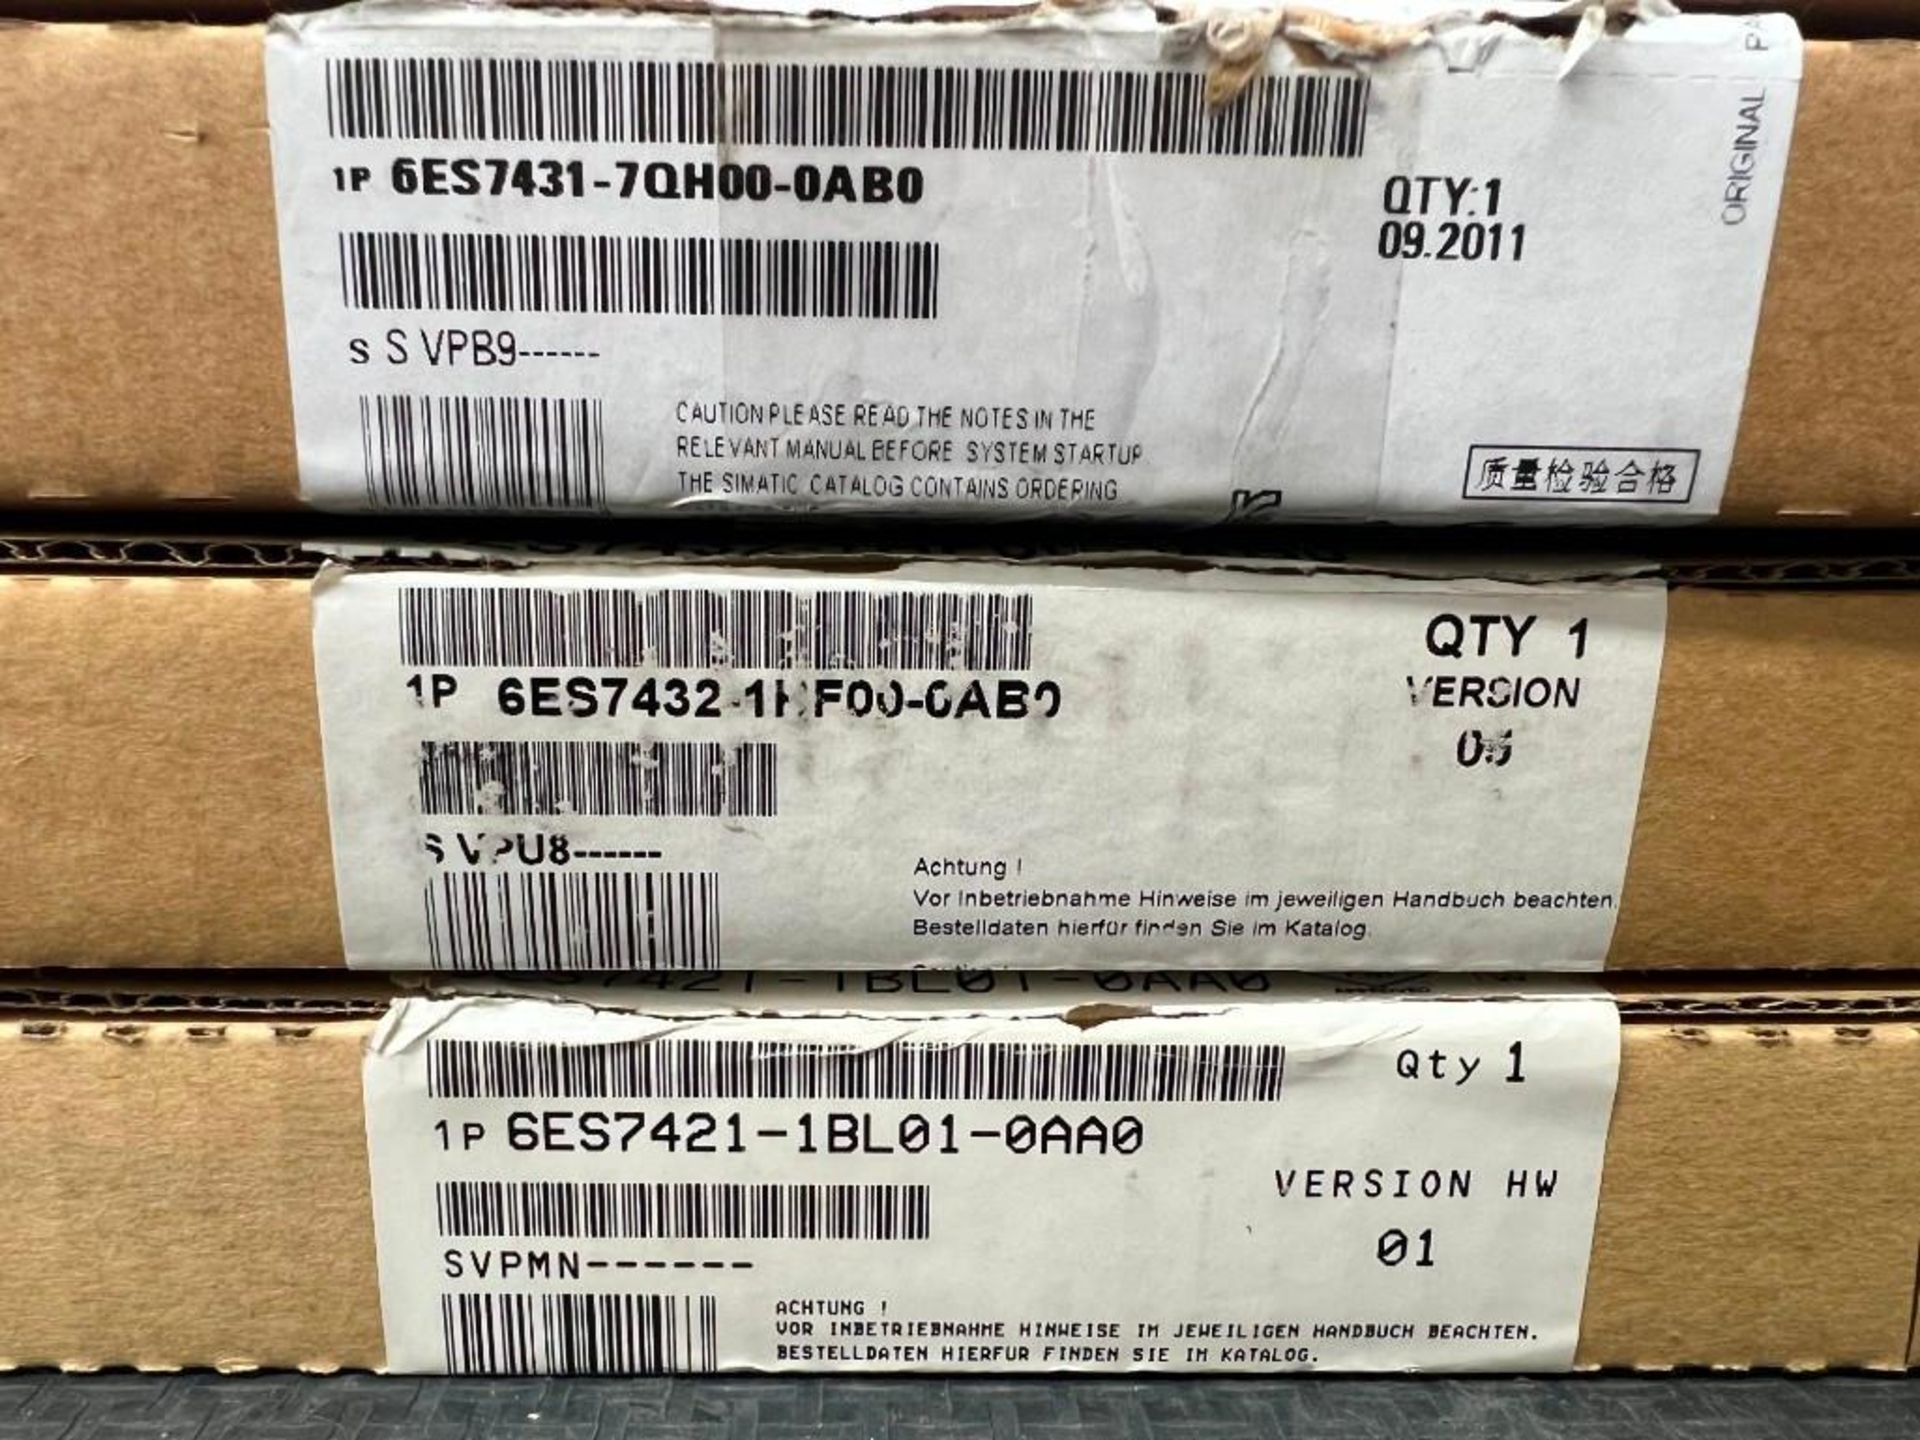 LOT OF NEW IN BOX SIEMENS COMPONENTS (16ES7421-1BL01-0AA0, 160S74321HF00-0AB0, 16ES7431-7QH00-0AB0, - Image 3 of 3